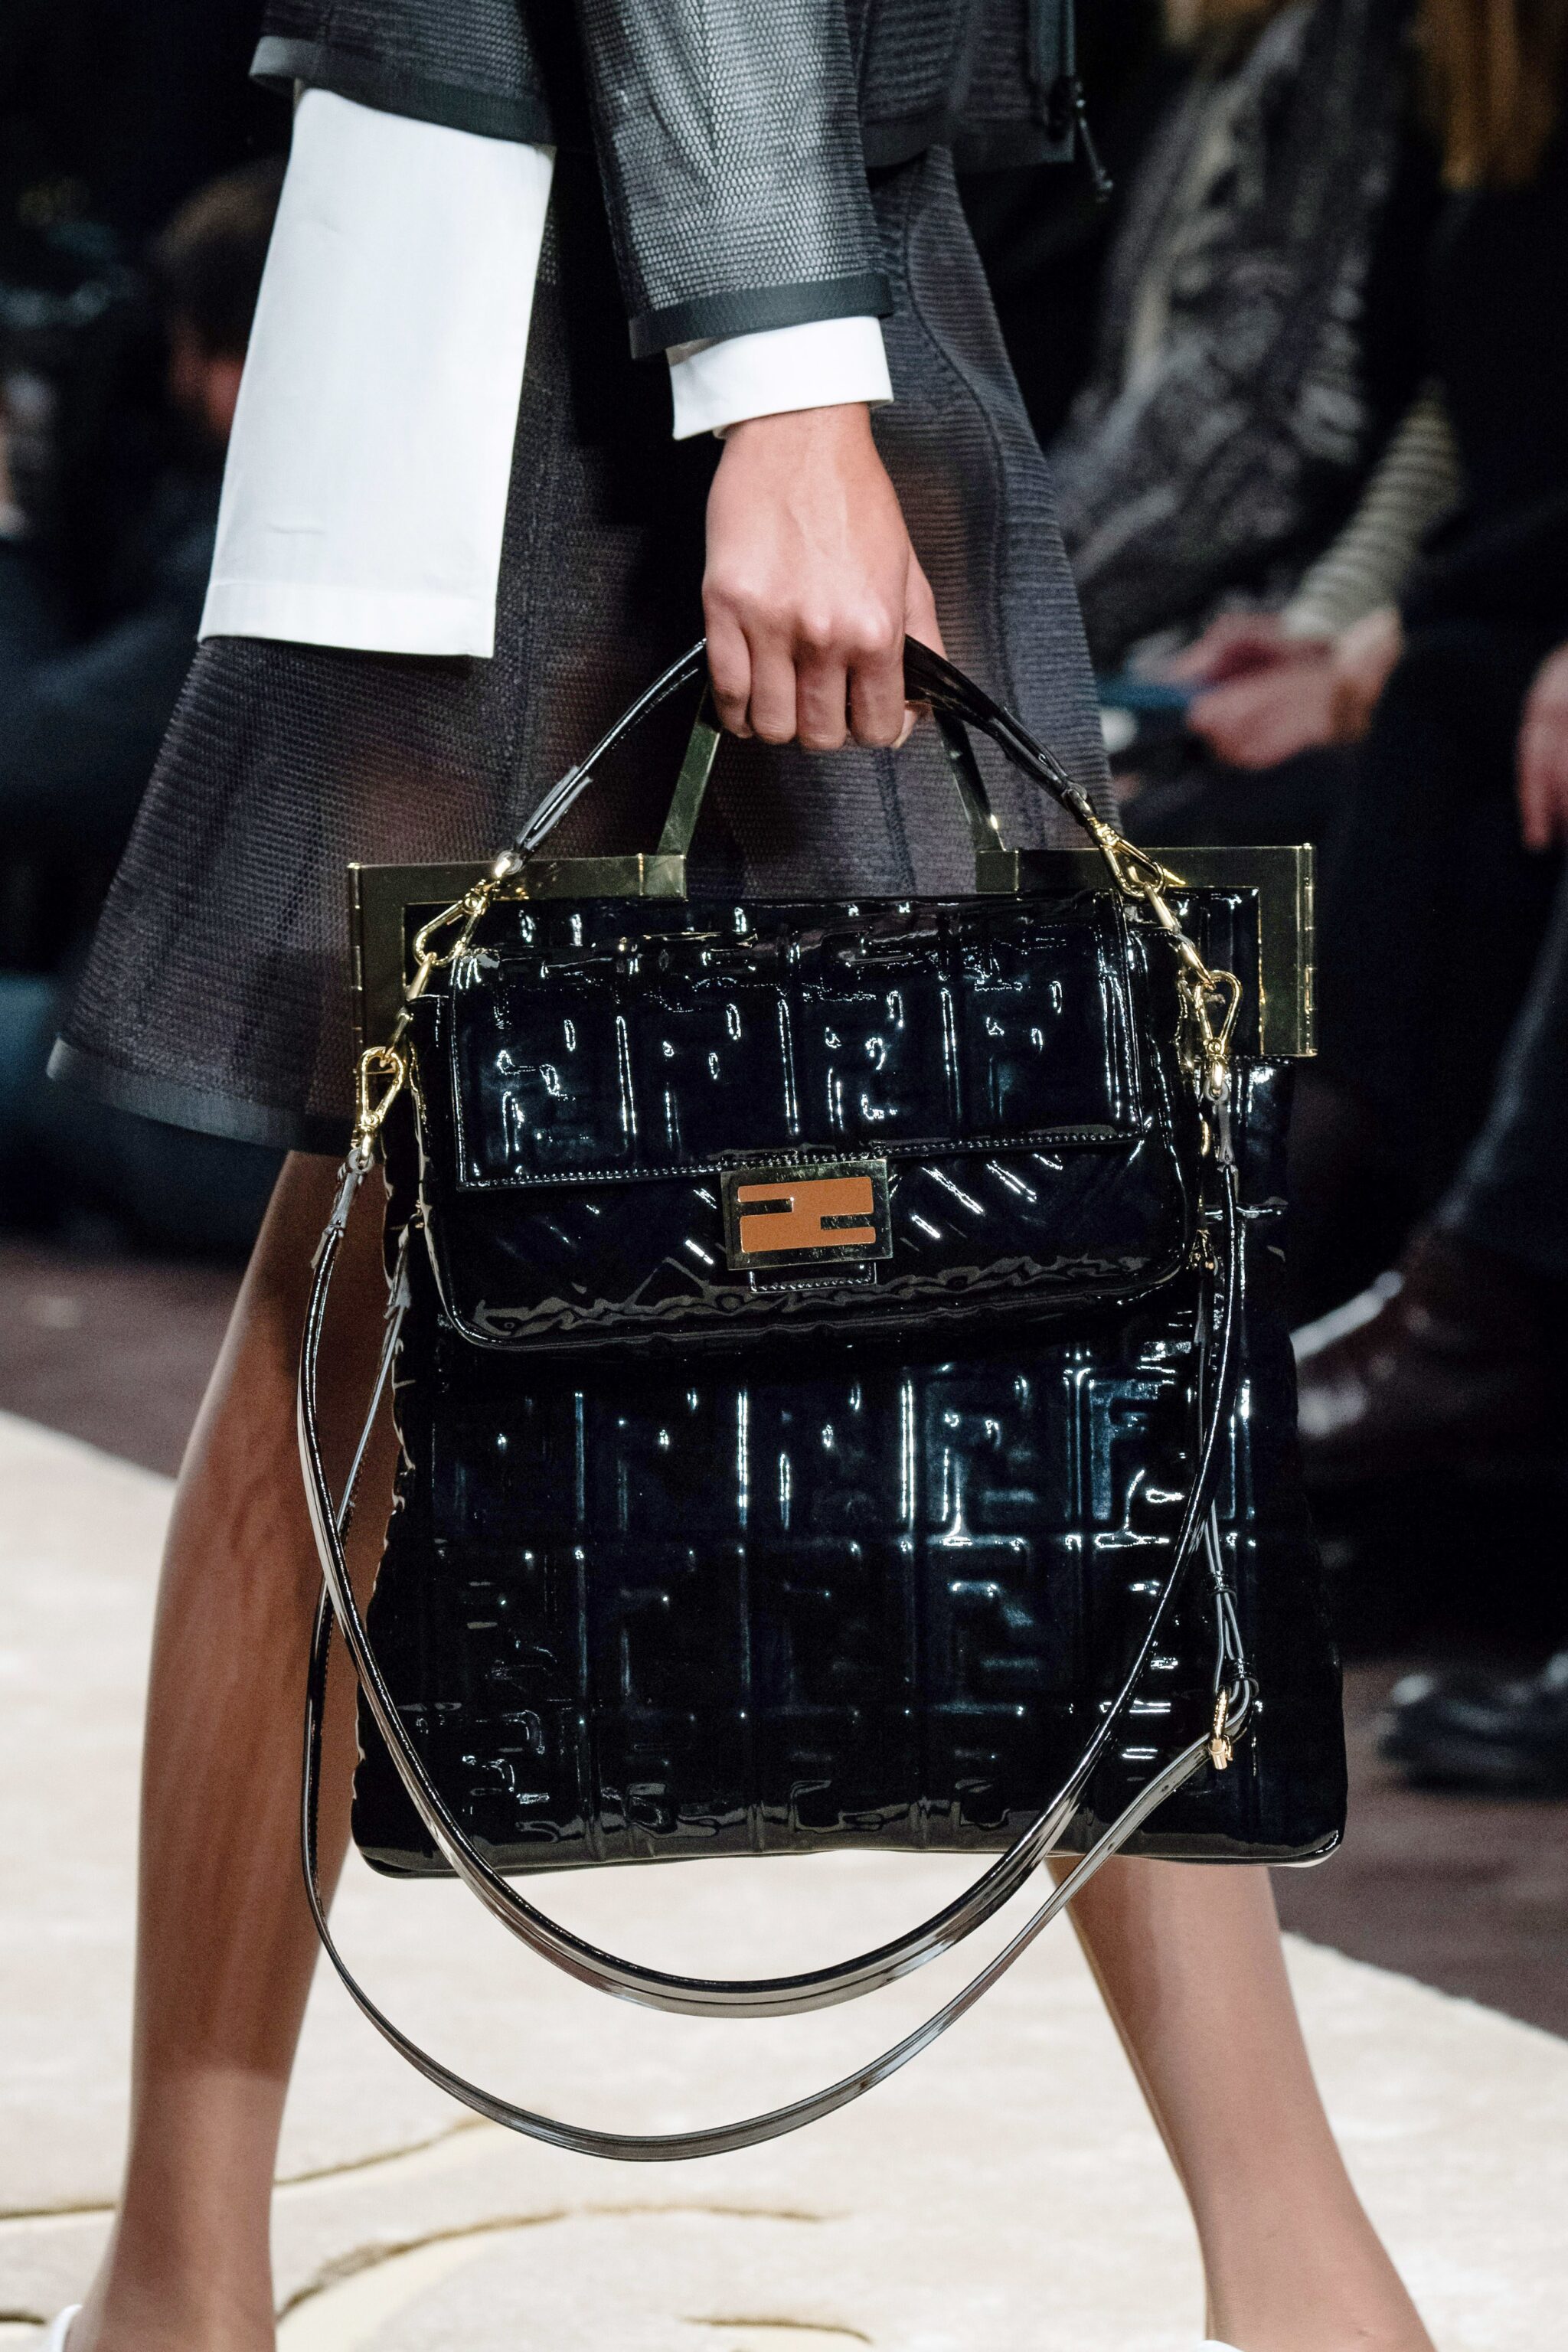 Fendi Fall/Winter 2019 Runway Bag Collection | Spotted Fashion